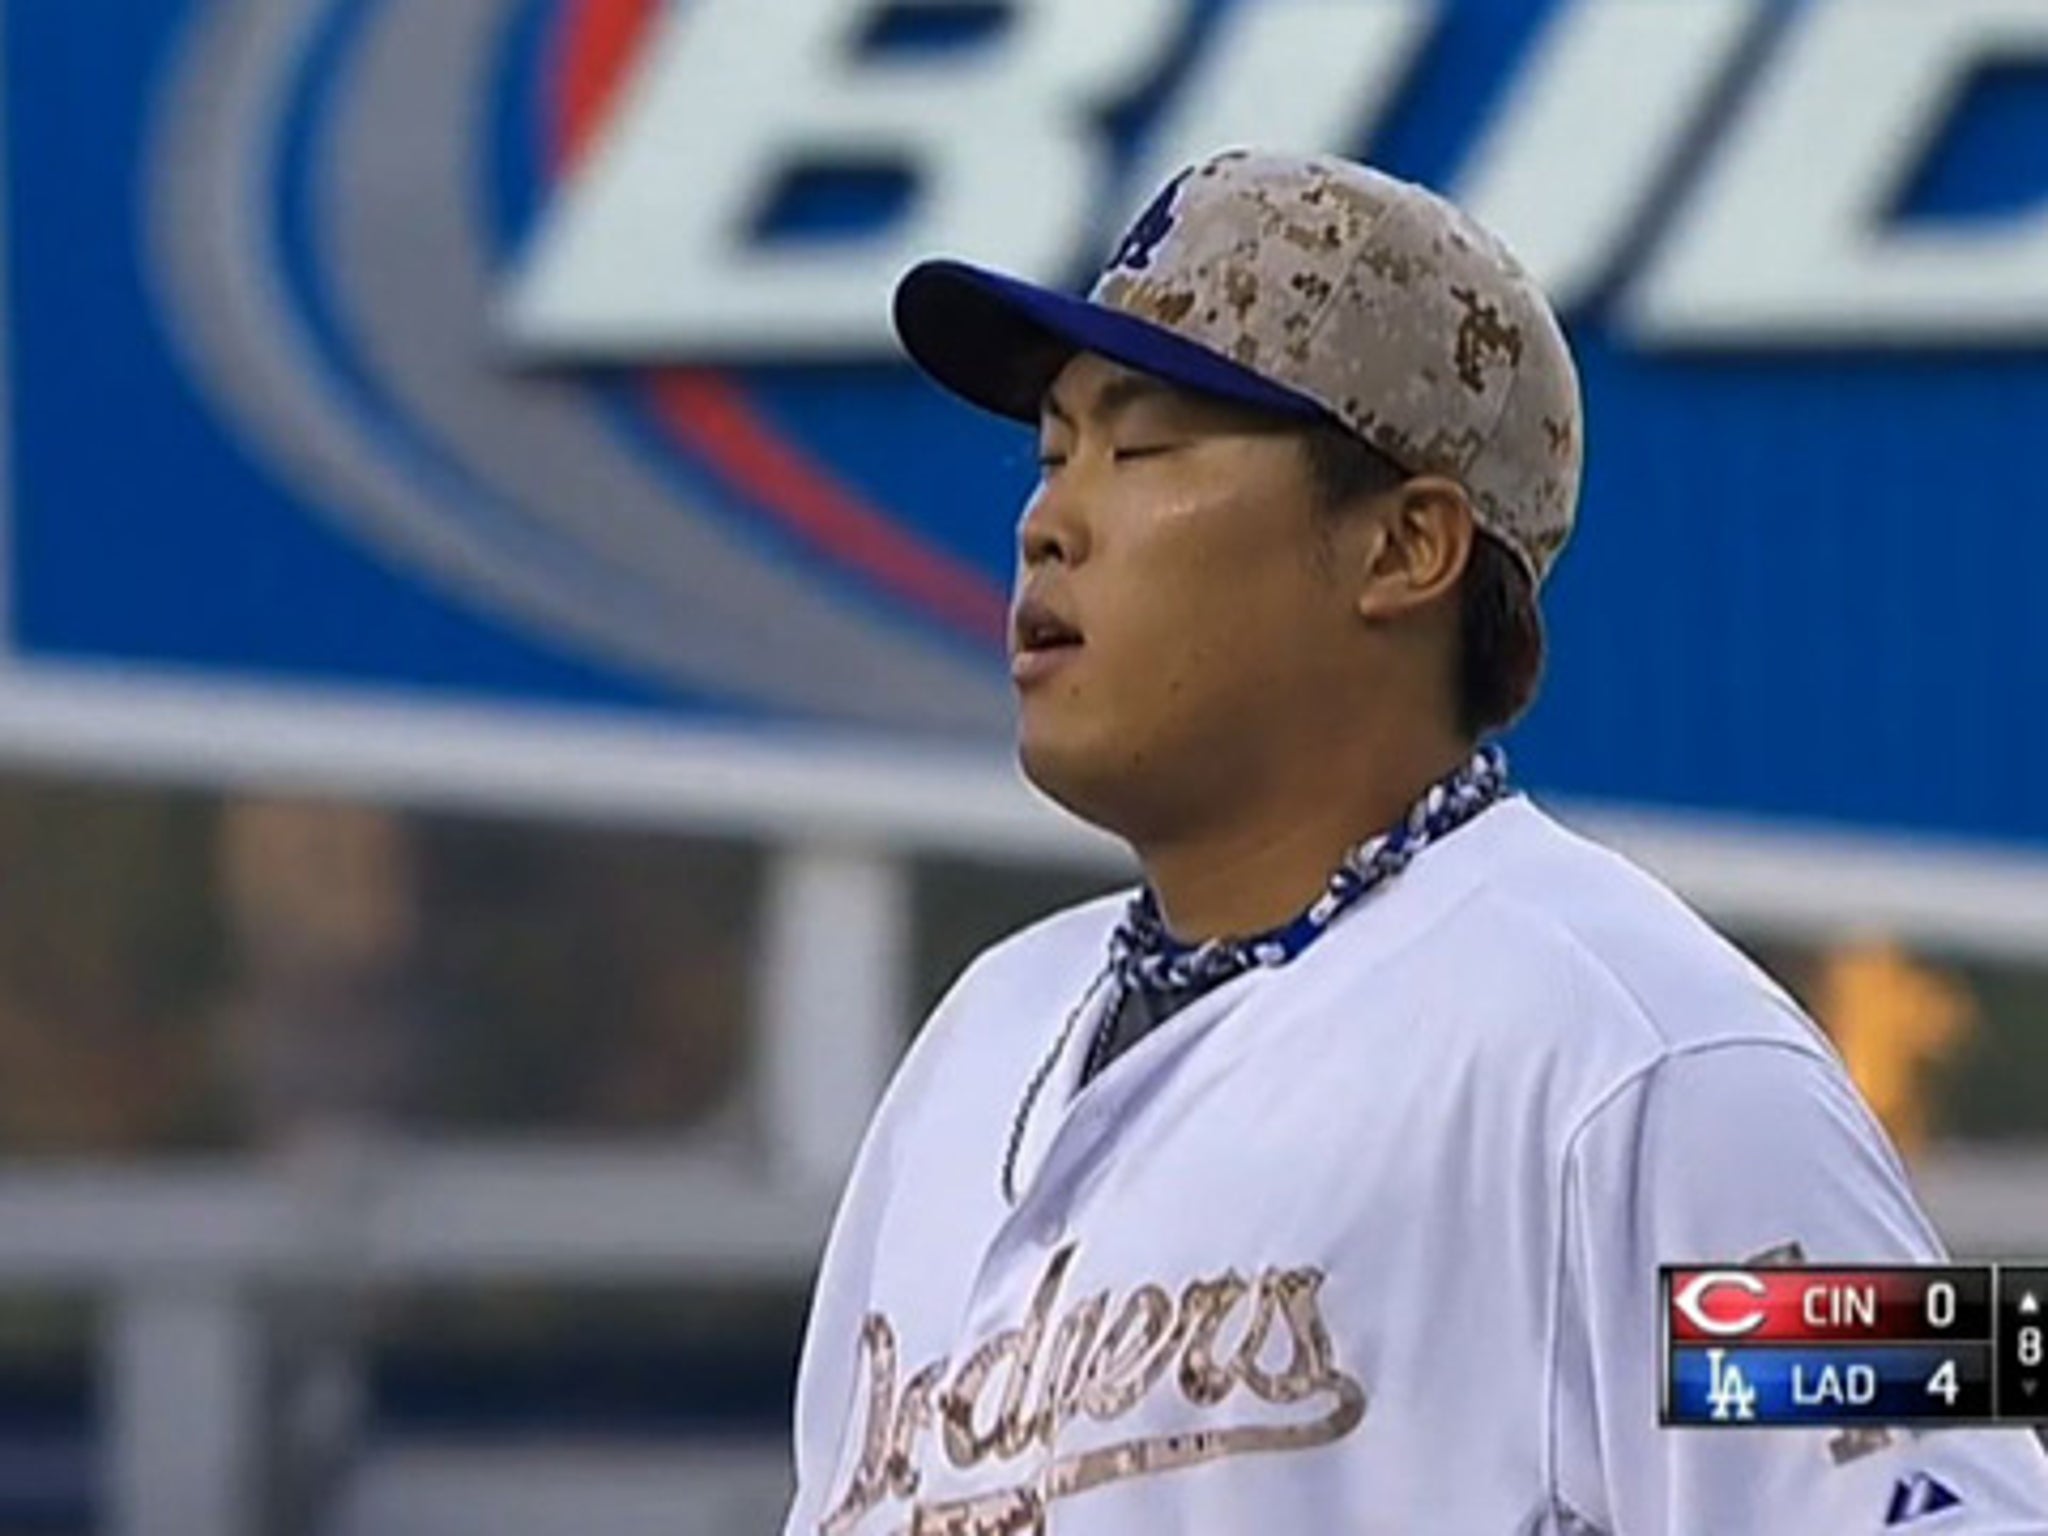 Hyun-jin Ryu -- DON'T BLAME ANNOUNCER FOR JINXING PERFECT GAME  Says Vin  Scully